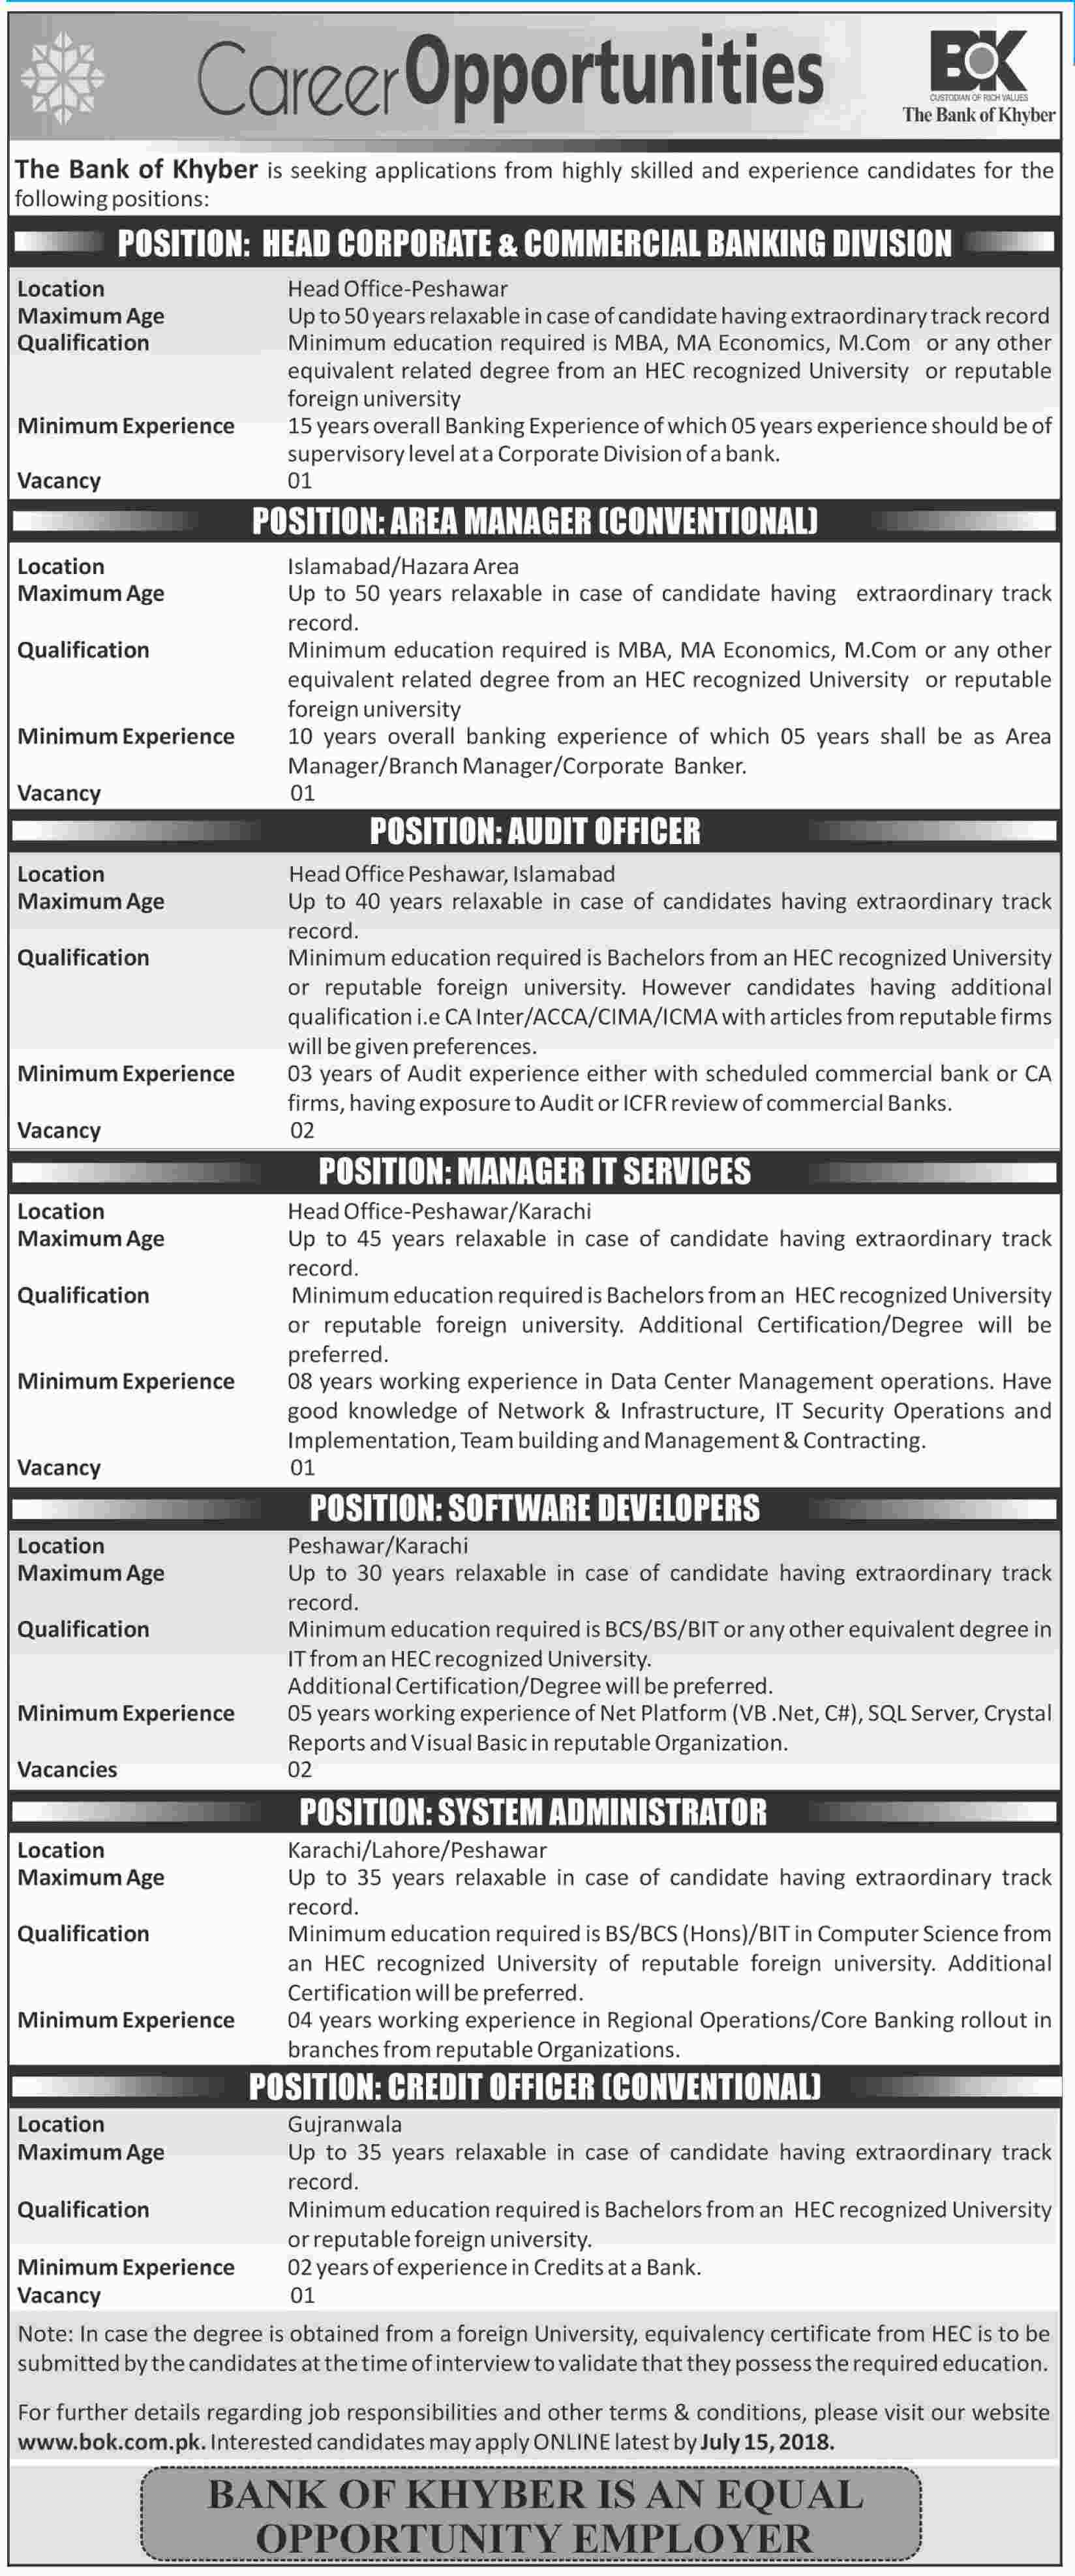 Jobs in The Bank of Khyber 01 July 2018